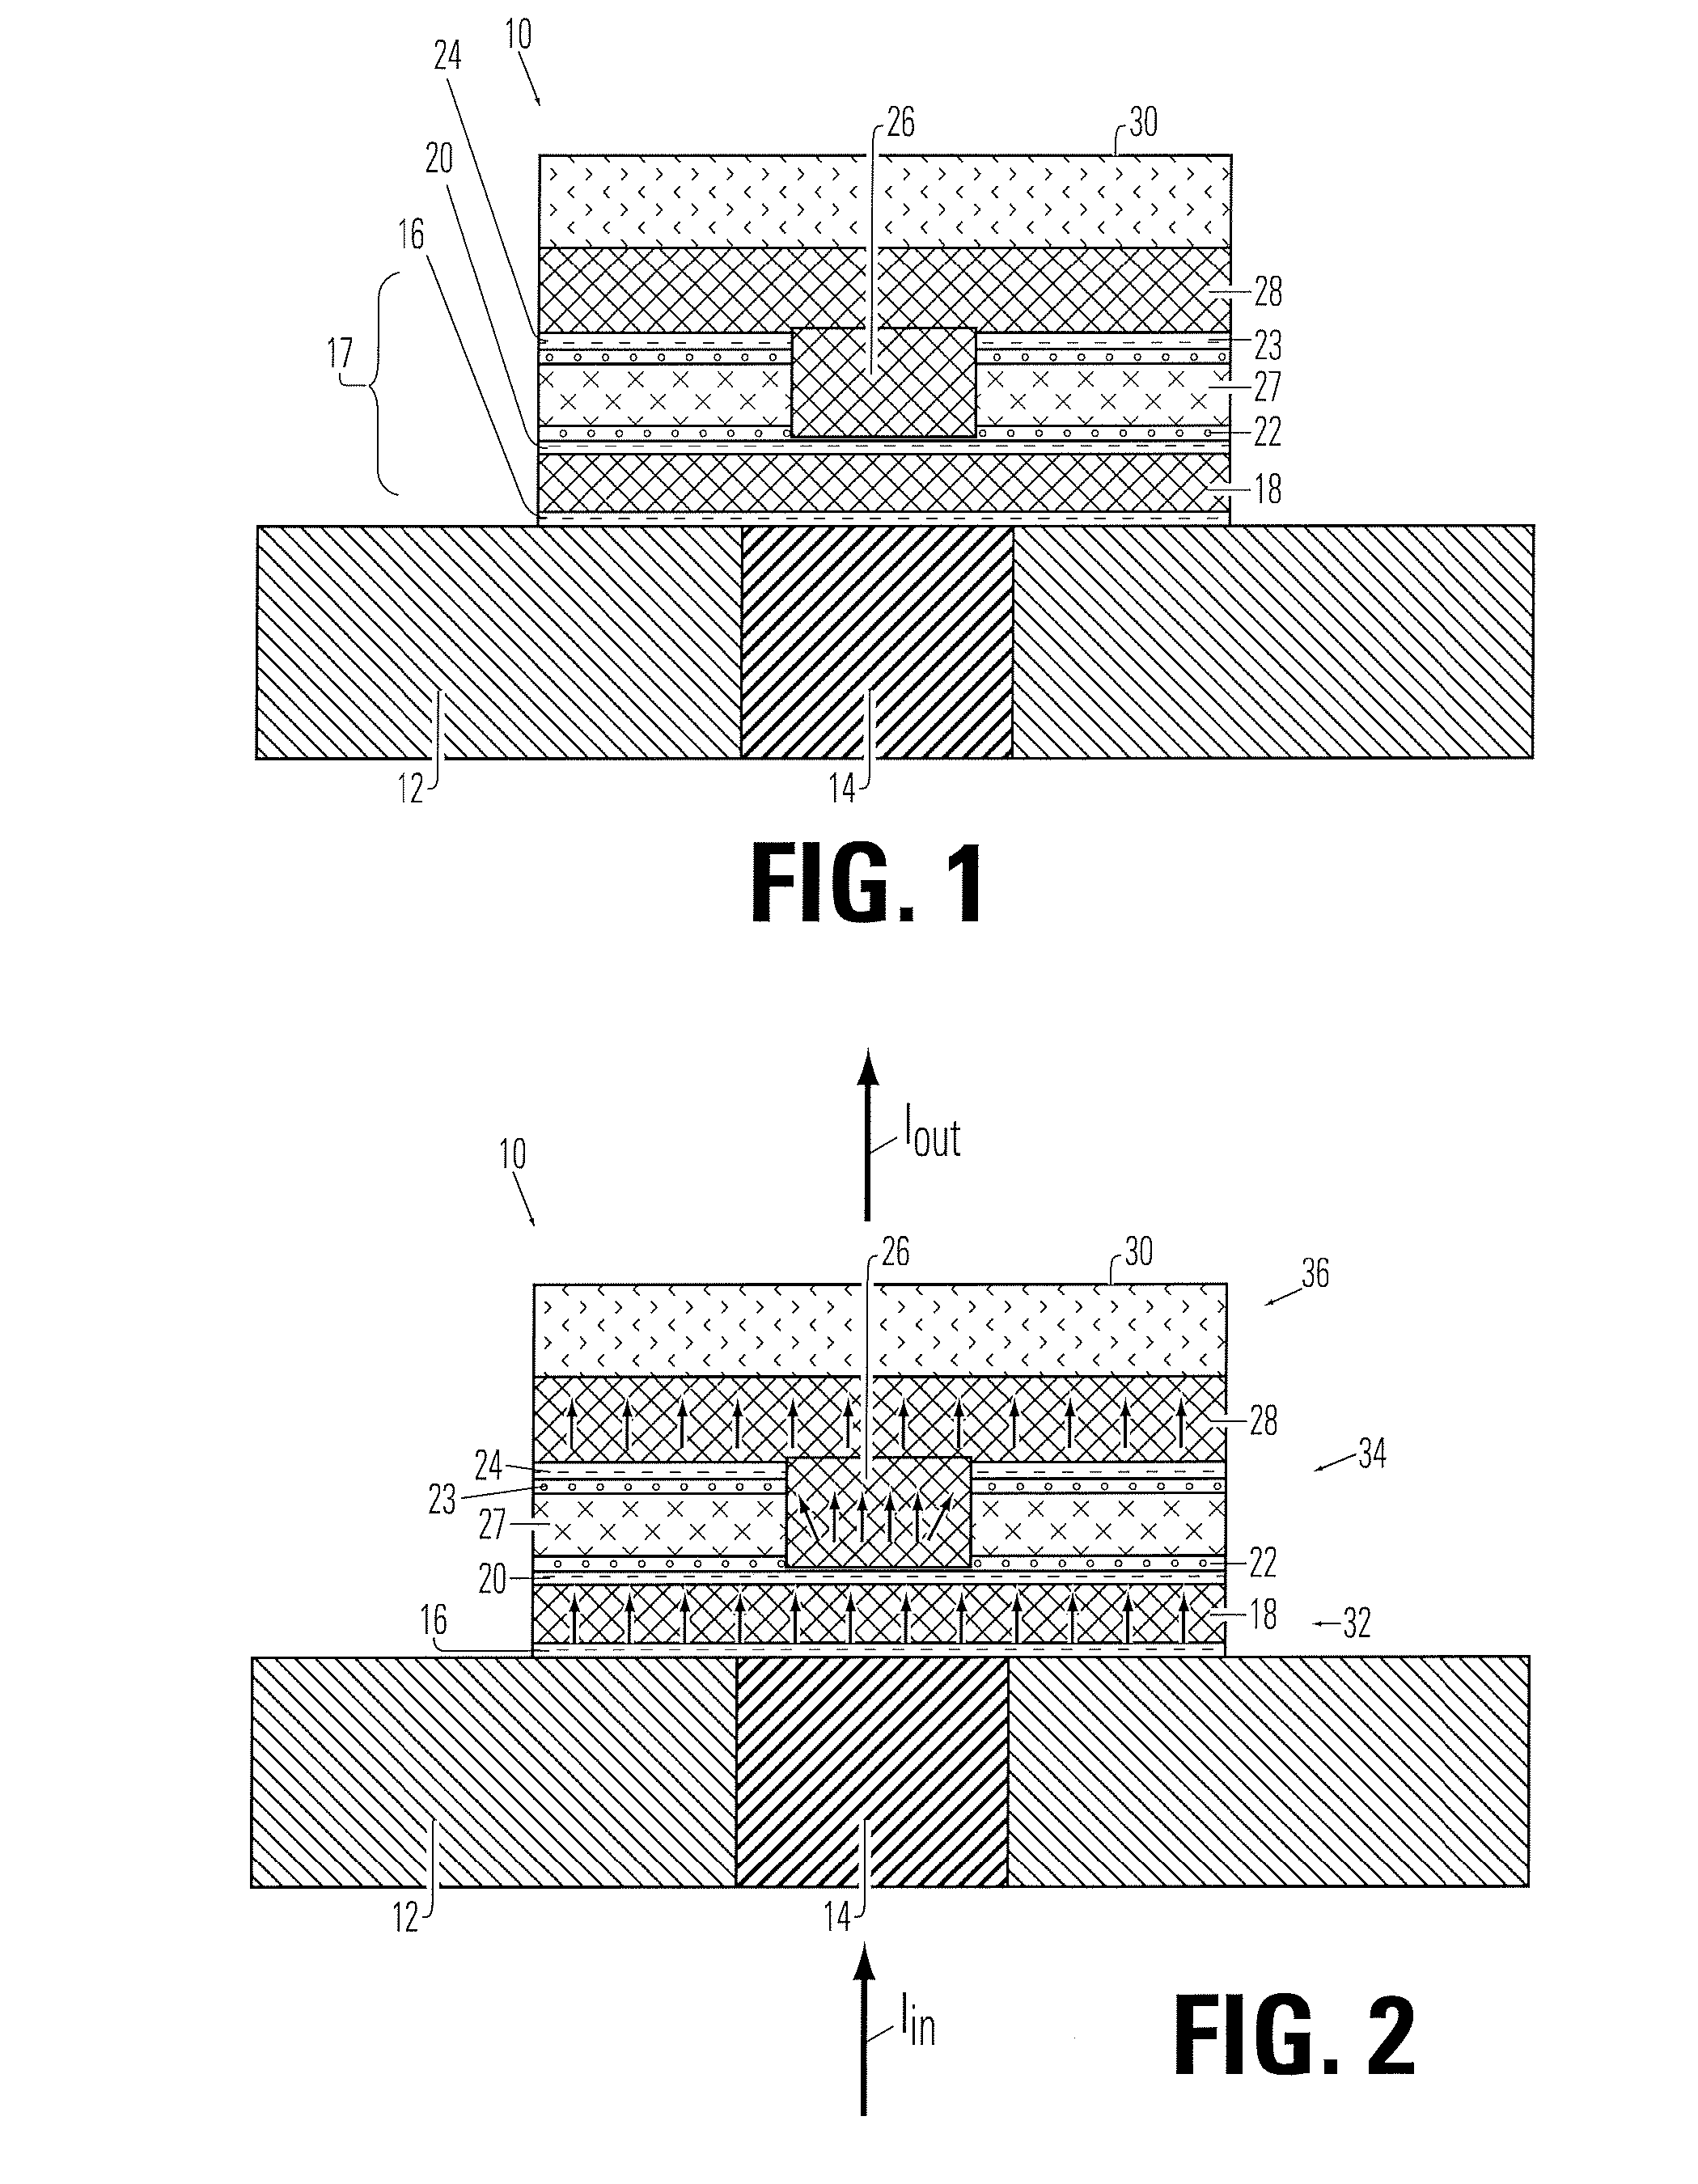 I-shaped phase change memory cell with thermal isolation